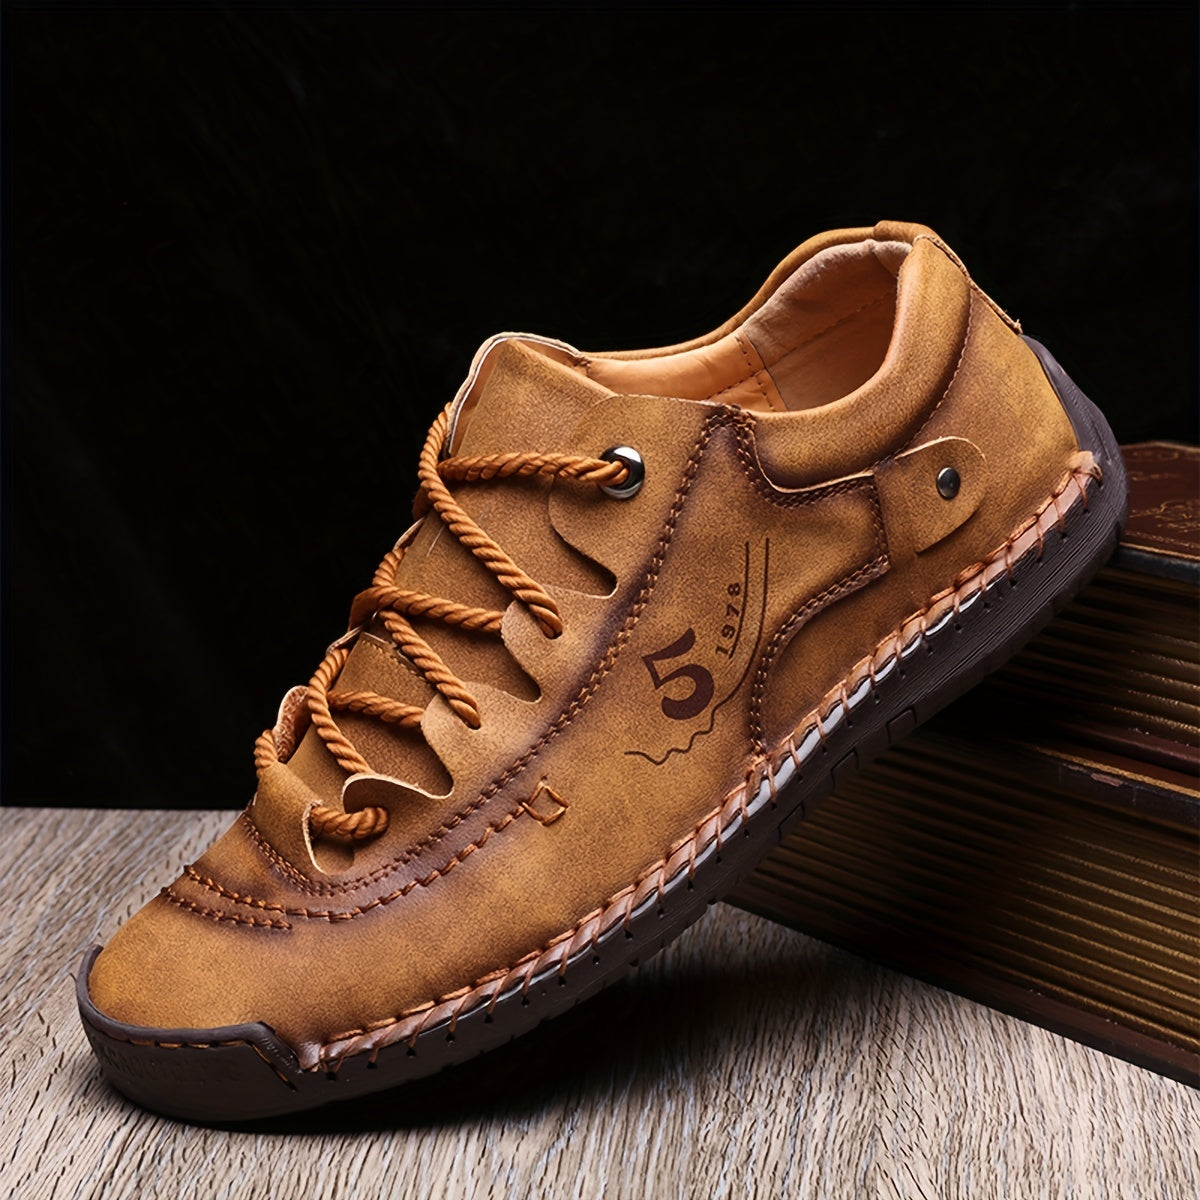 Men's Handmade Stitching Casual Shoes Flats Outdoor Walking Sneakers